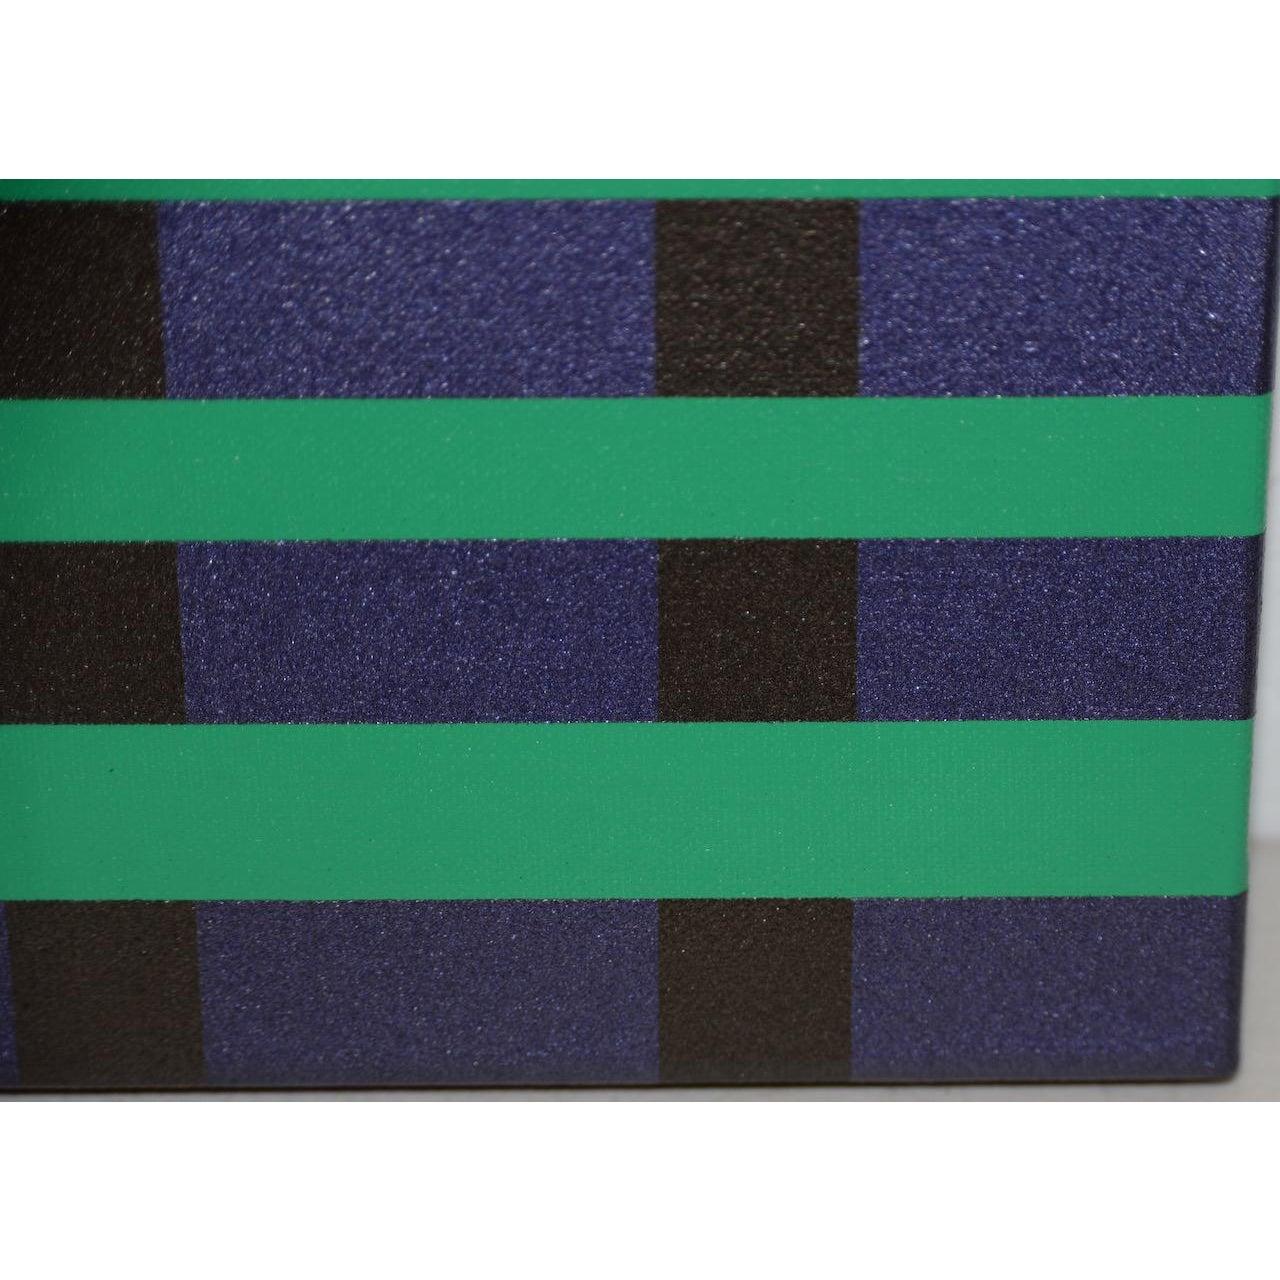 Charles Hersey vintage acrylic op-art painting, circa 1971

Fantastic op-art painting by San Francisco artist Charles Hersey.

Bold black and green against a purple background.

Canvas dimensions: 12